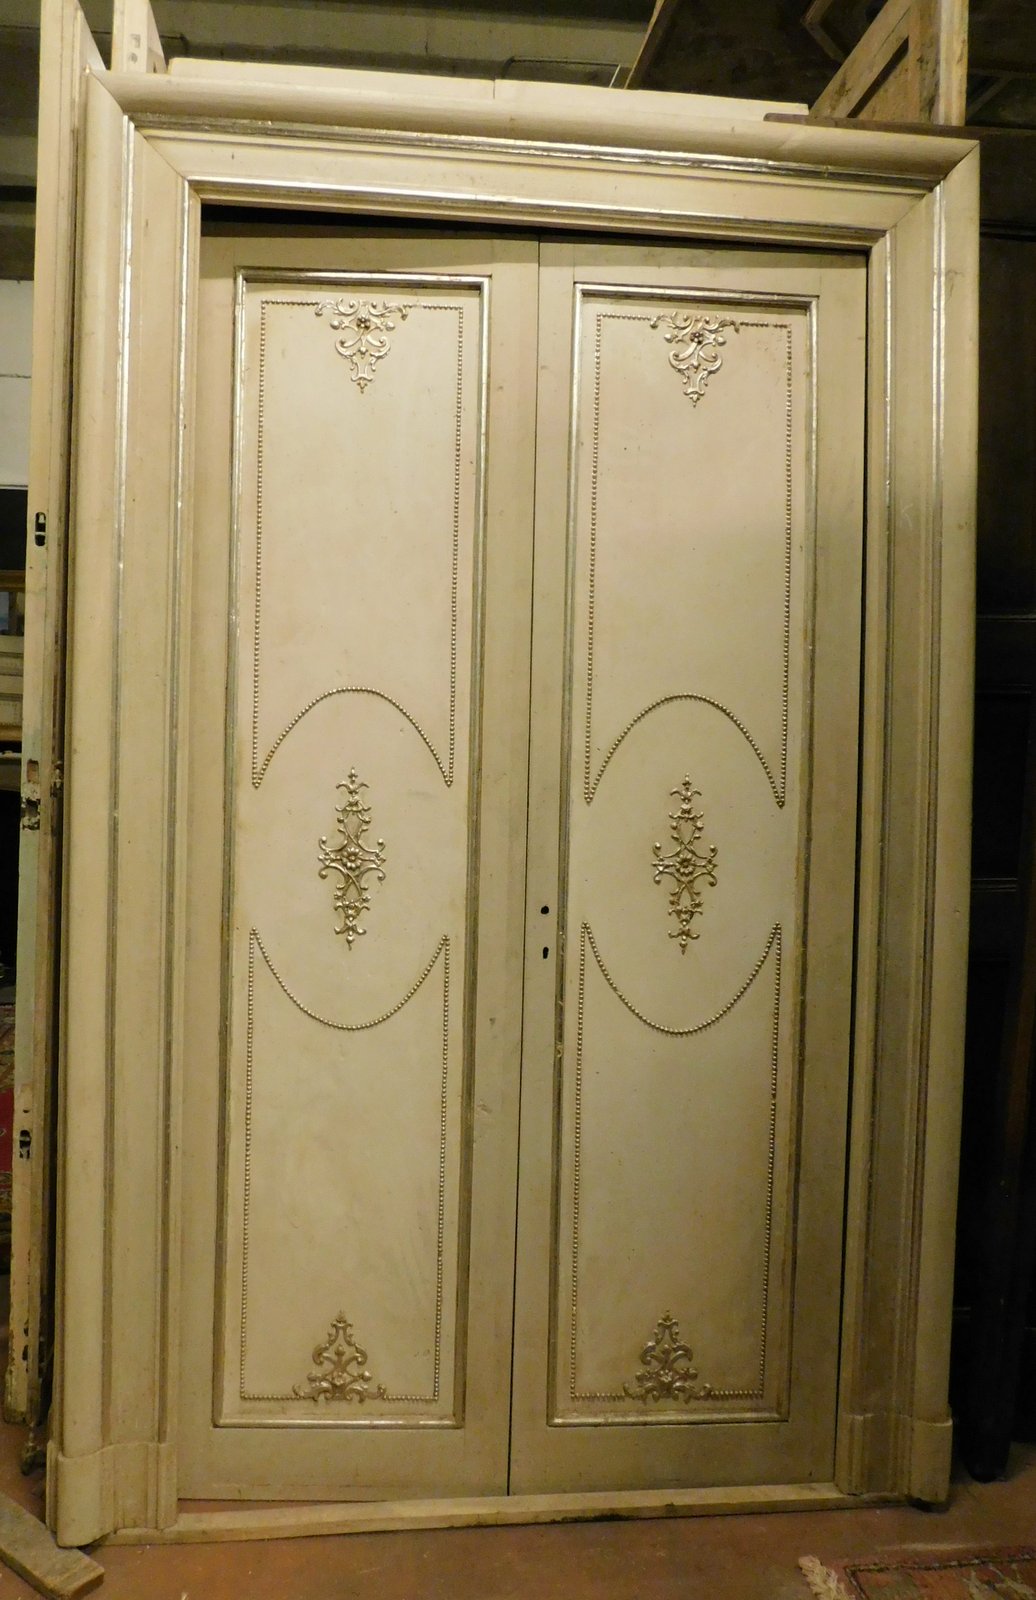 ptl232 n. 2 ivory and silver lacquered doors, meas. 156 x h 240 cm  